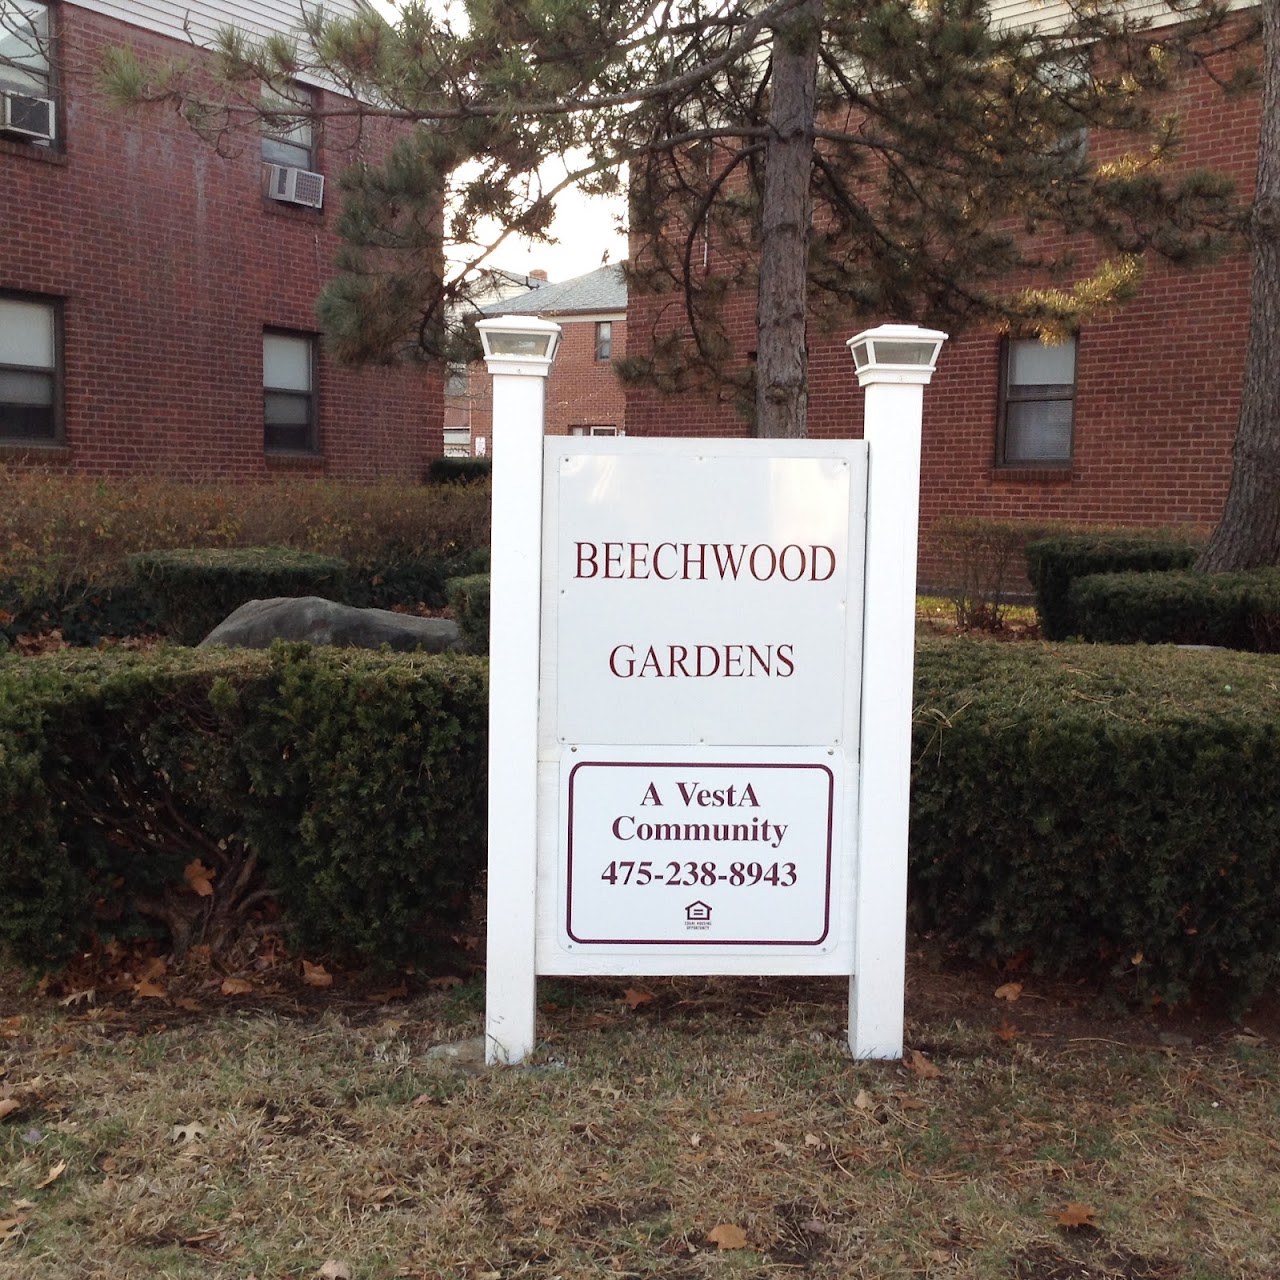 Photo of BEECHWOOD GARDENS. Affordable housing located at 600 WHALLEY AVENUE NEW HAVEN, CT 06511